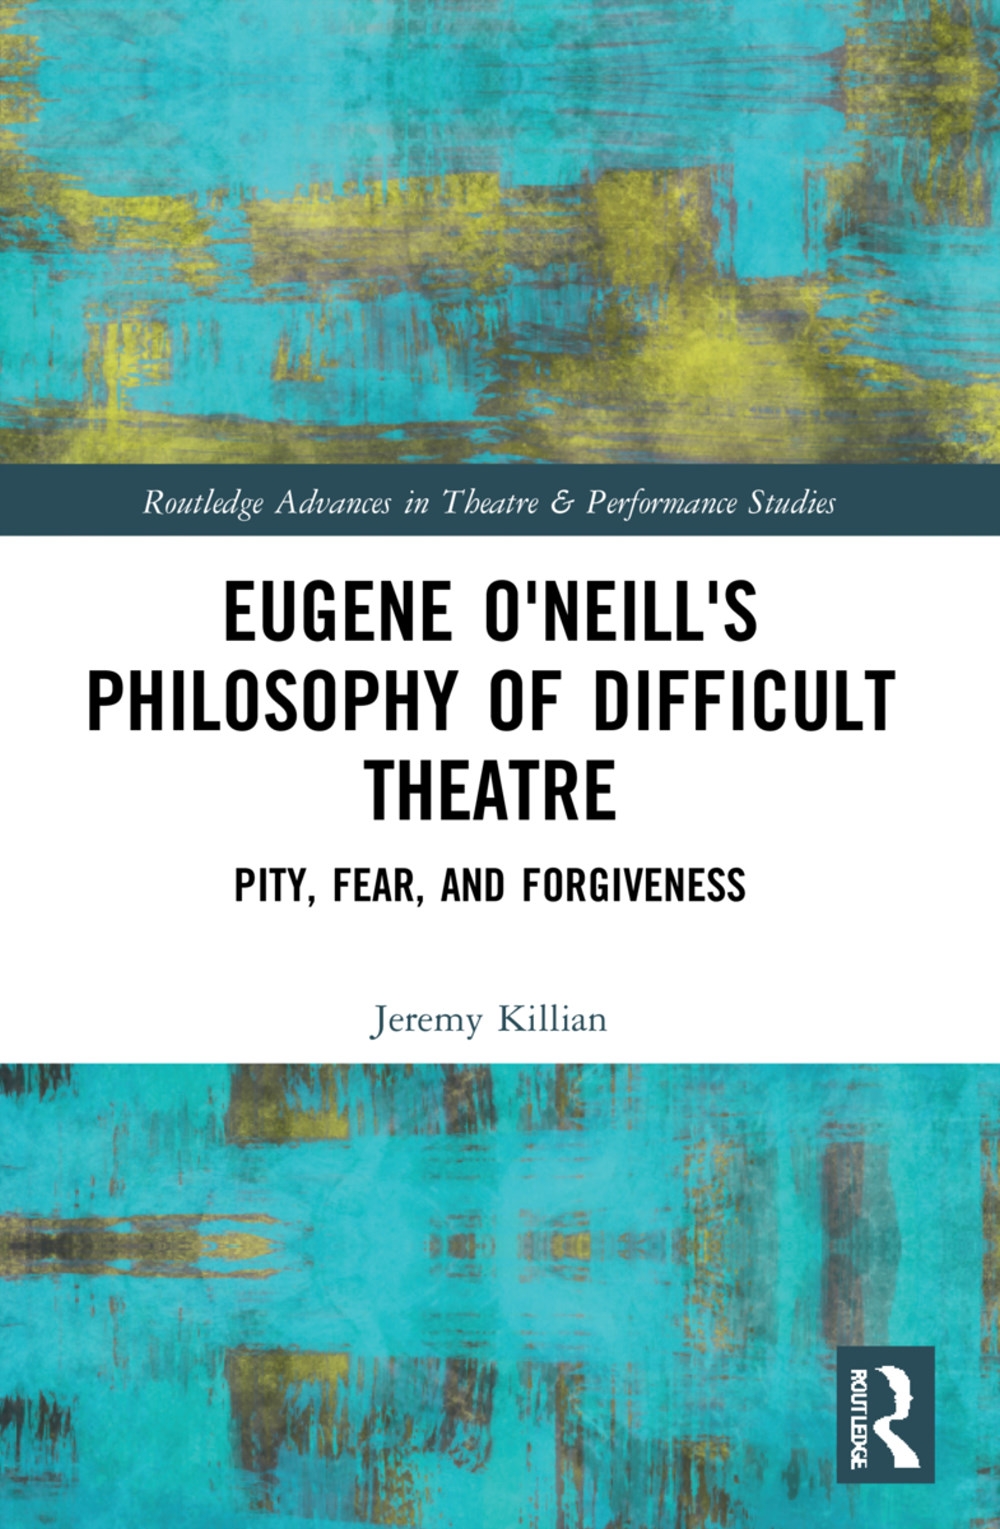 Eugene O’Neill’s Philosophy of Difficult Theatre: Pity, Fear, and Forgiveness